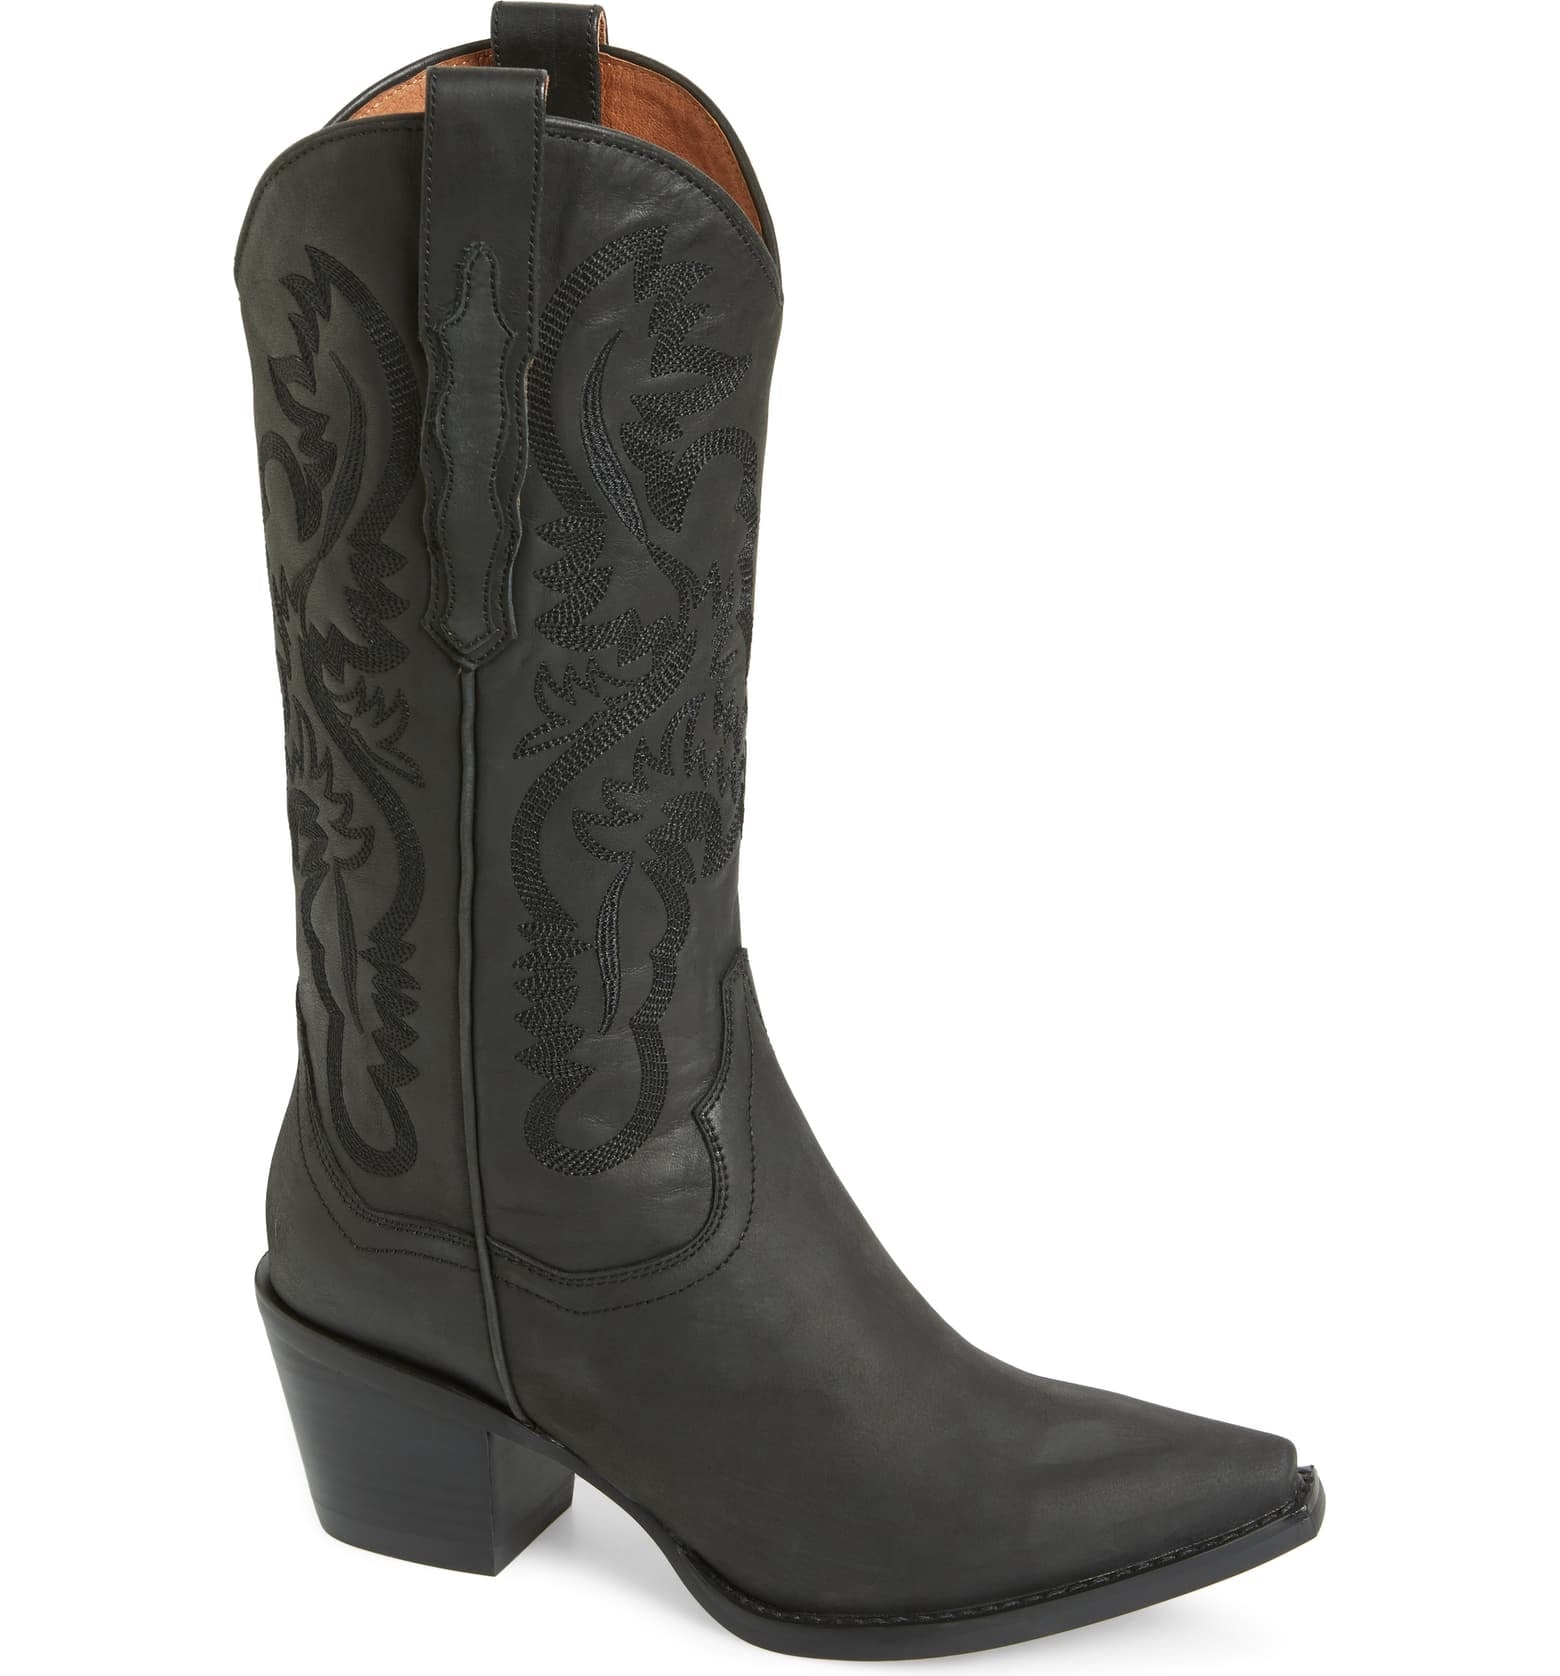 Most Stylish Cowboy Boots For Women 